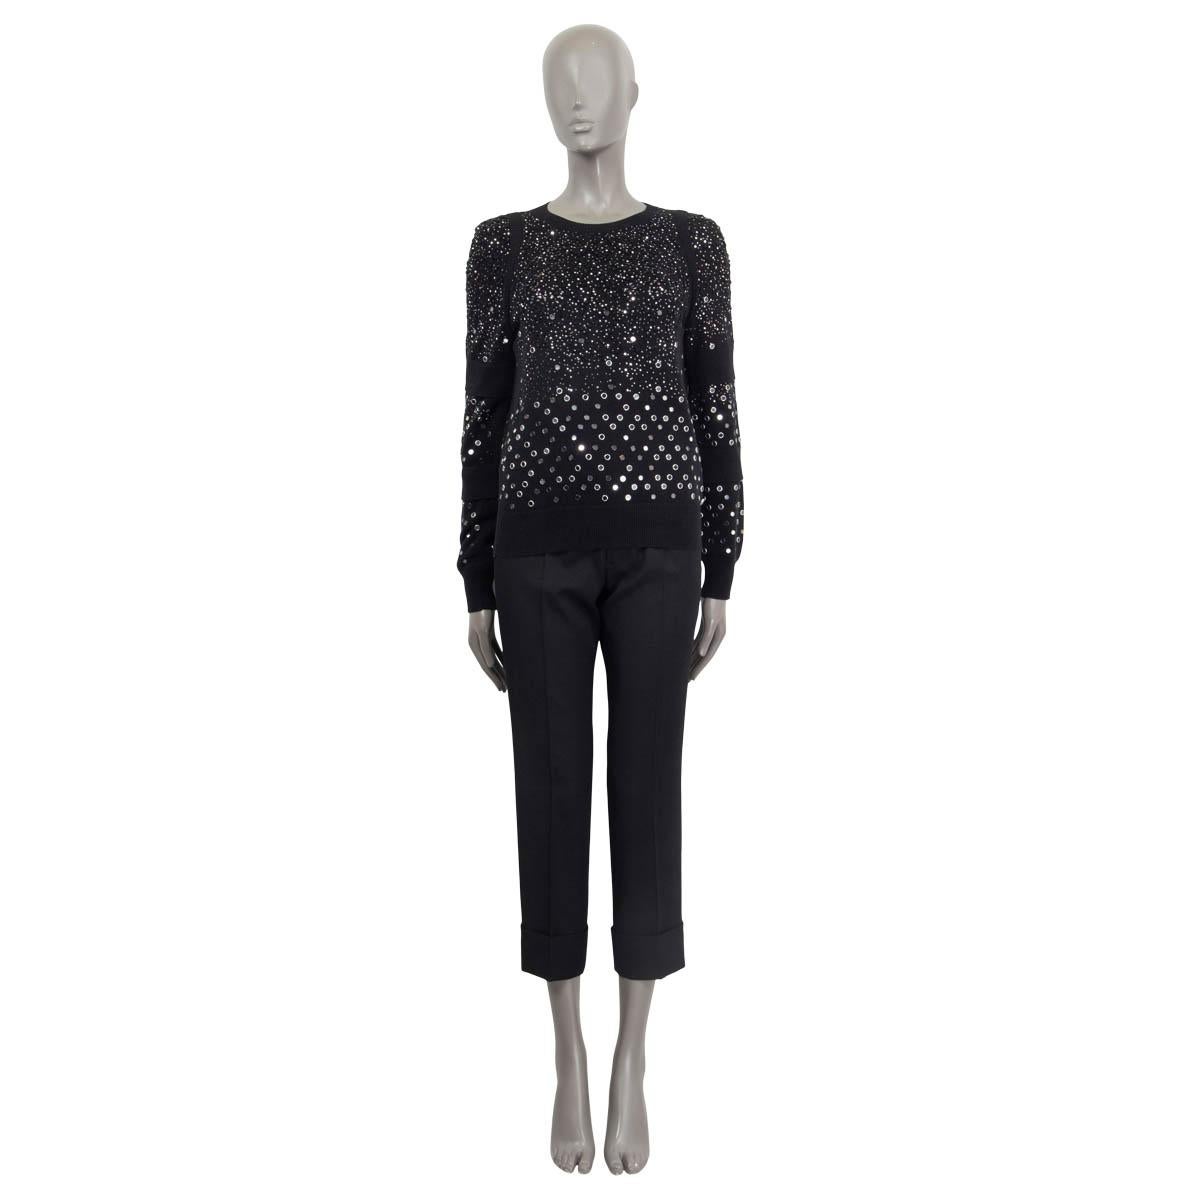 100% authentic Chanel Fall/Winter 2017 long sleeve sweater in black cotton (100%). Features cut out details on the shoulder and the bust. Embellished with studs, glitter and with ruffles on the sleeves. Unlined. Has been worn and is in excellent